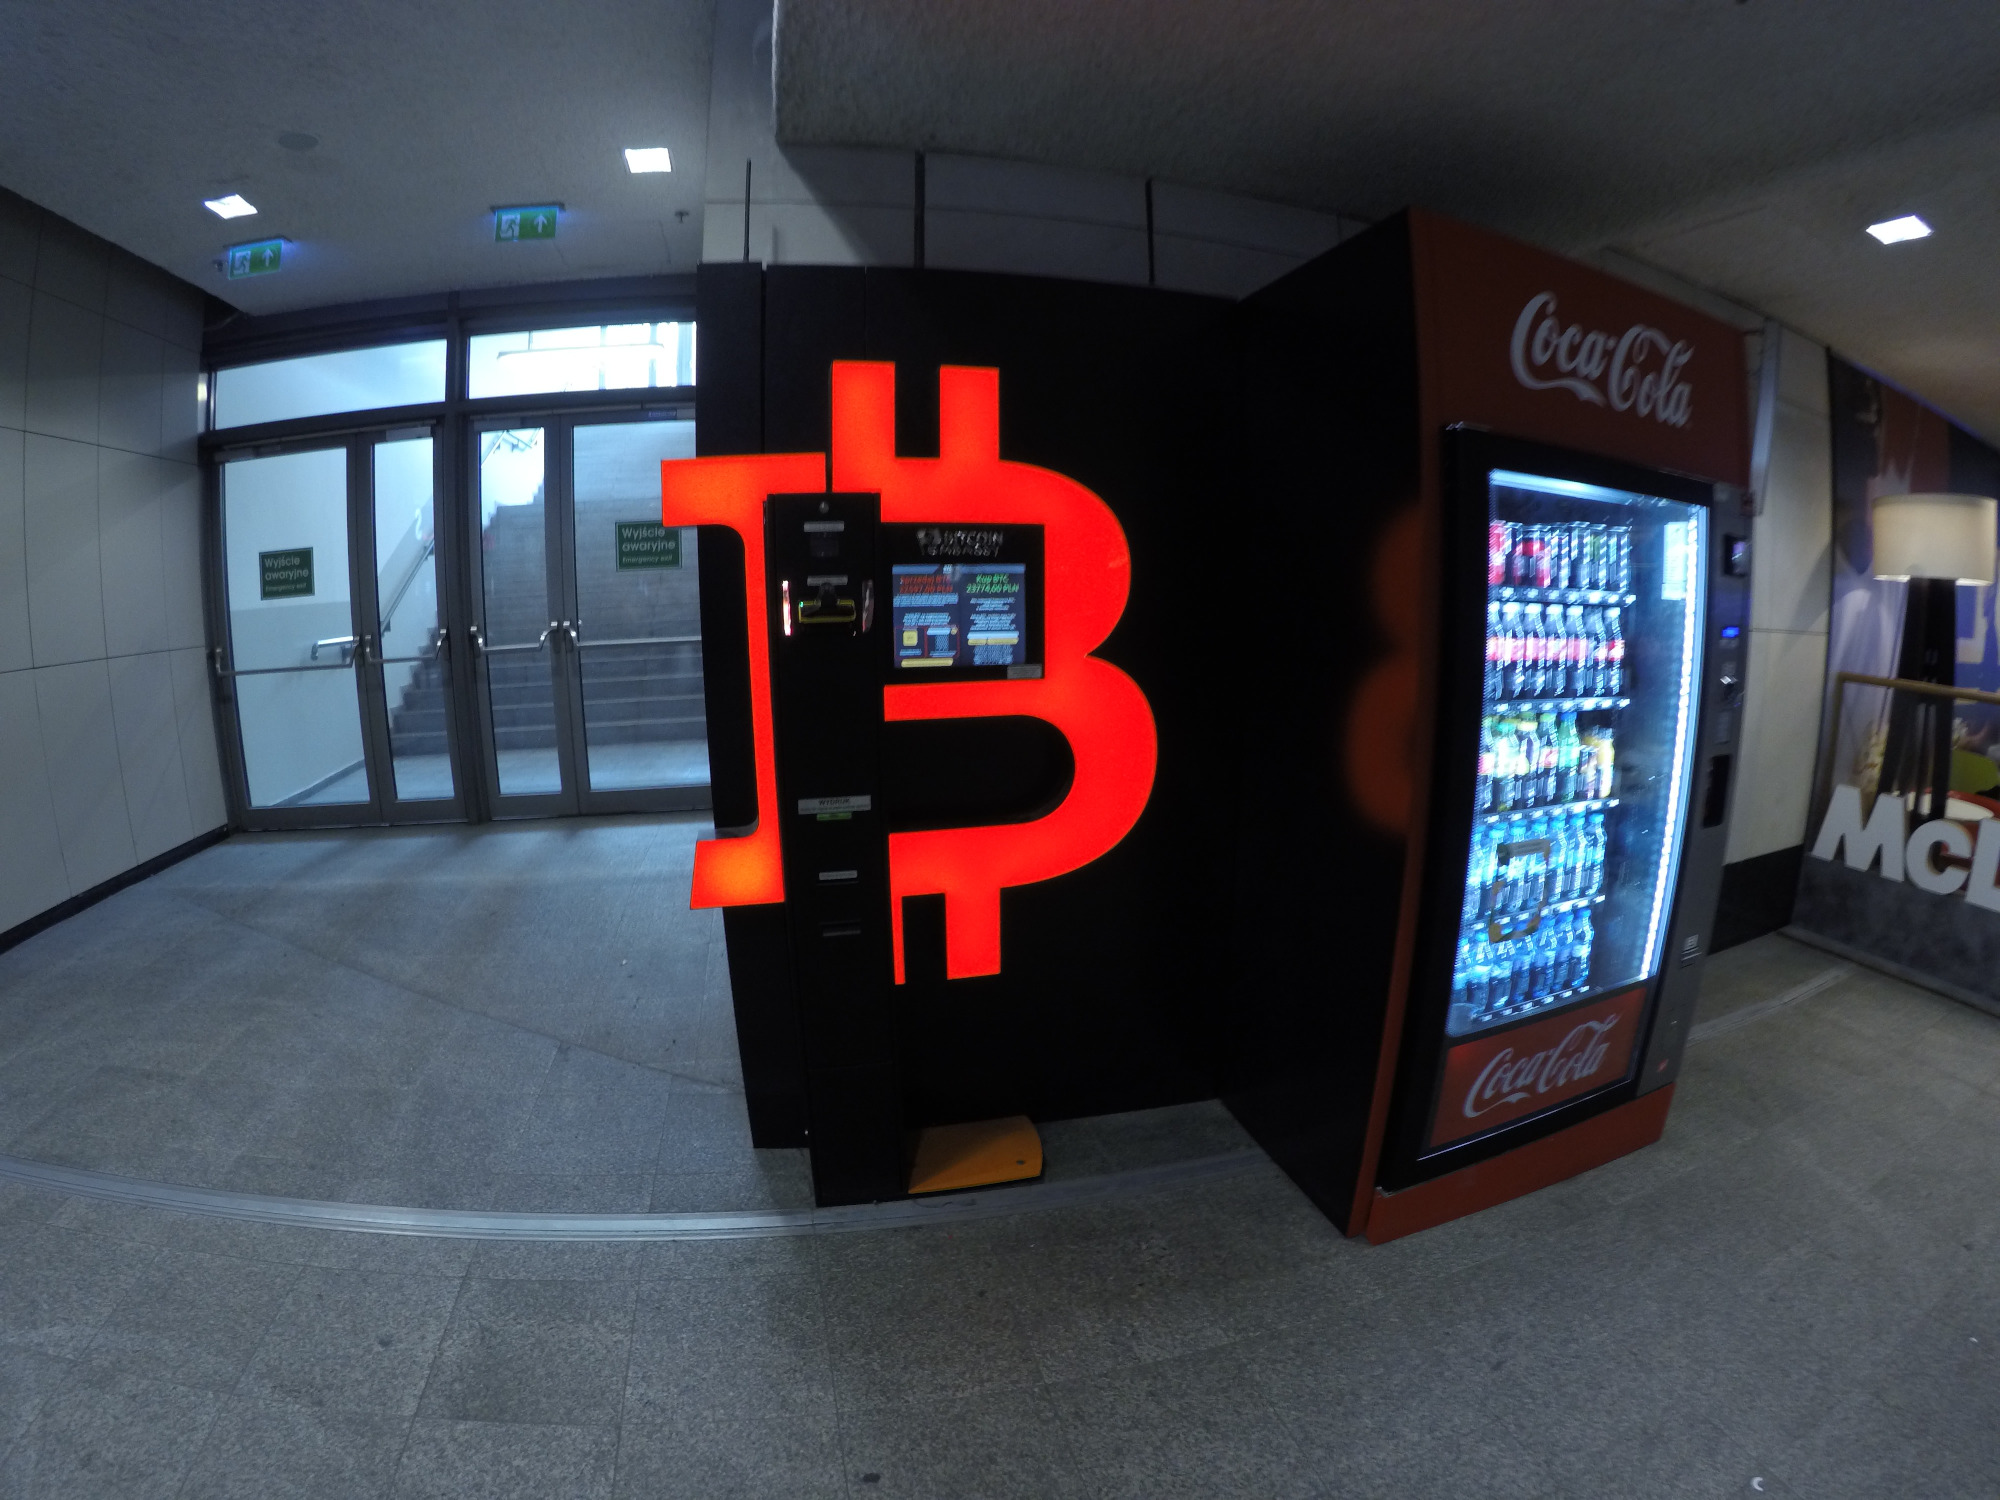 Arrival to Krakow's train station, here, some Bitcoins